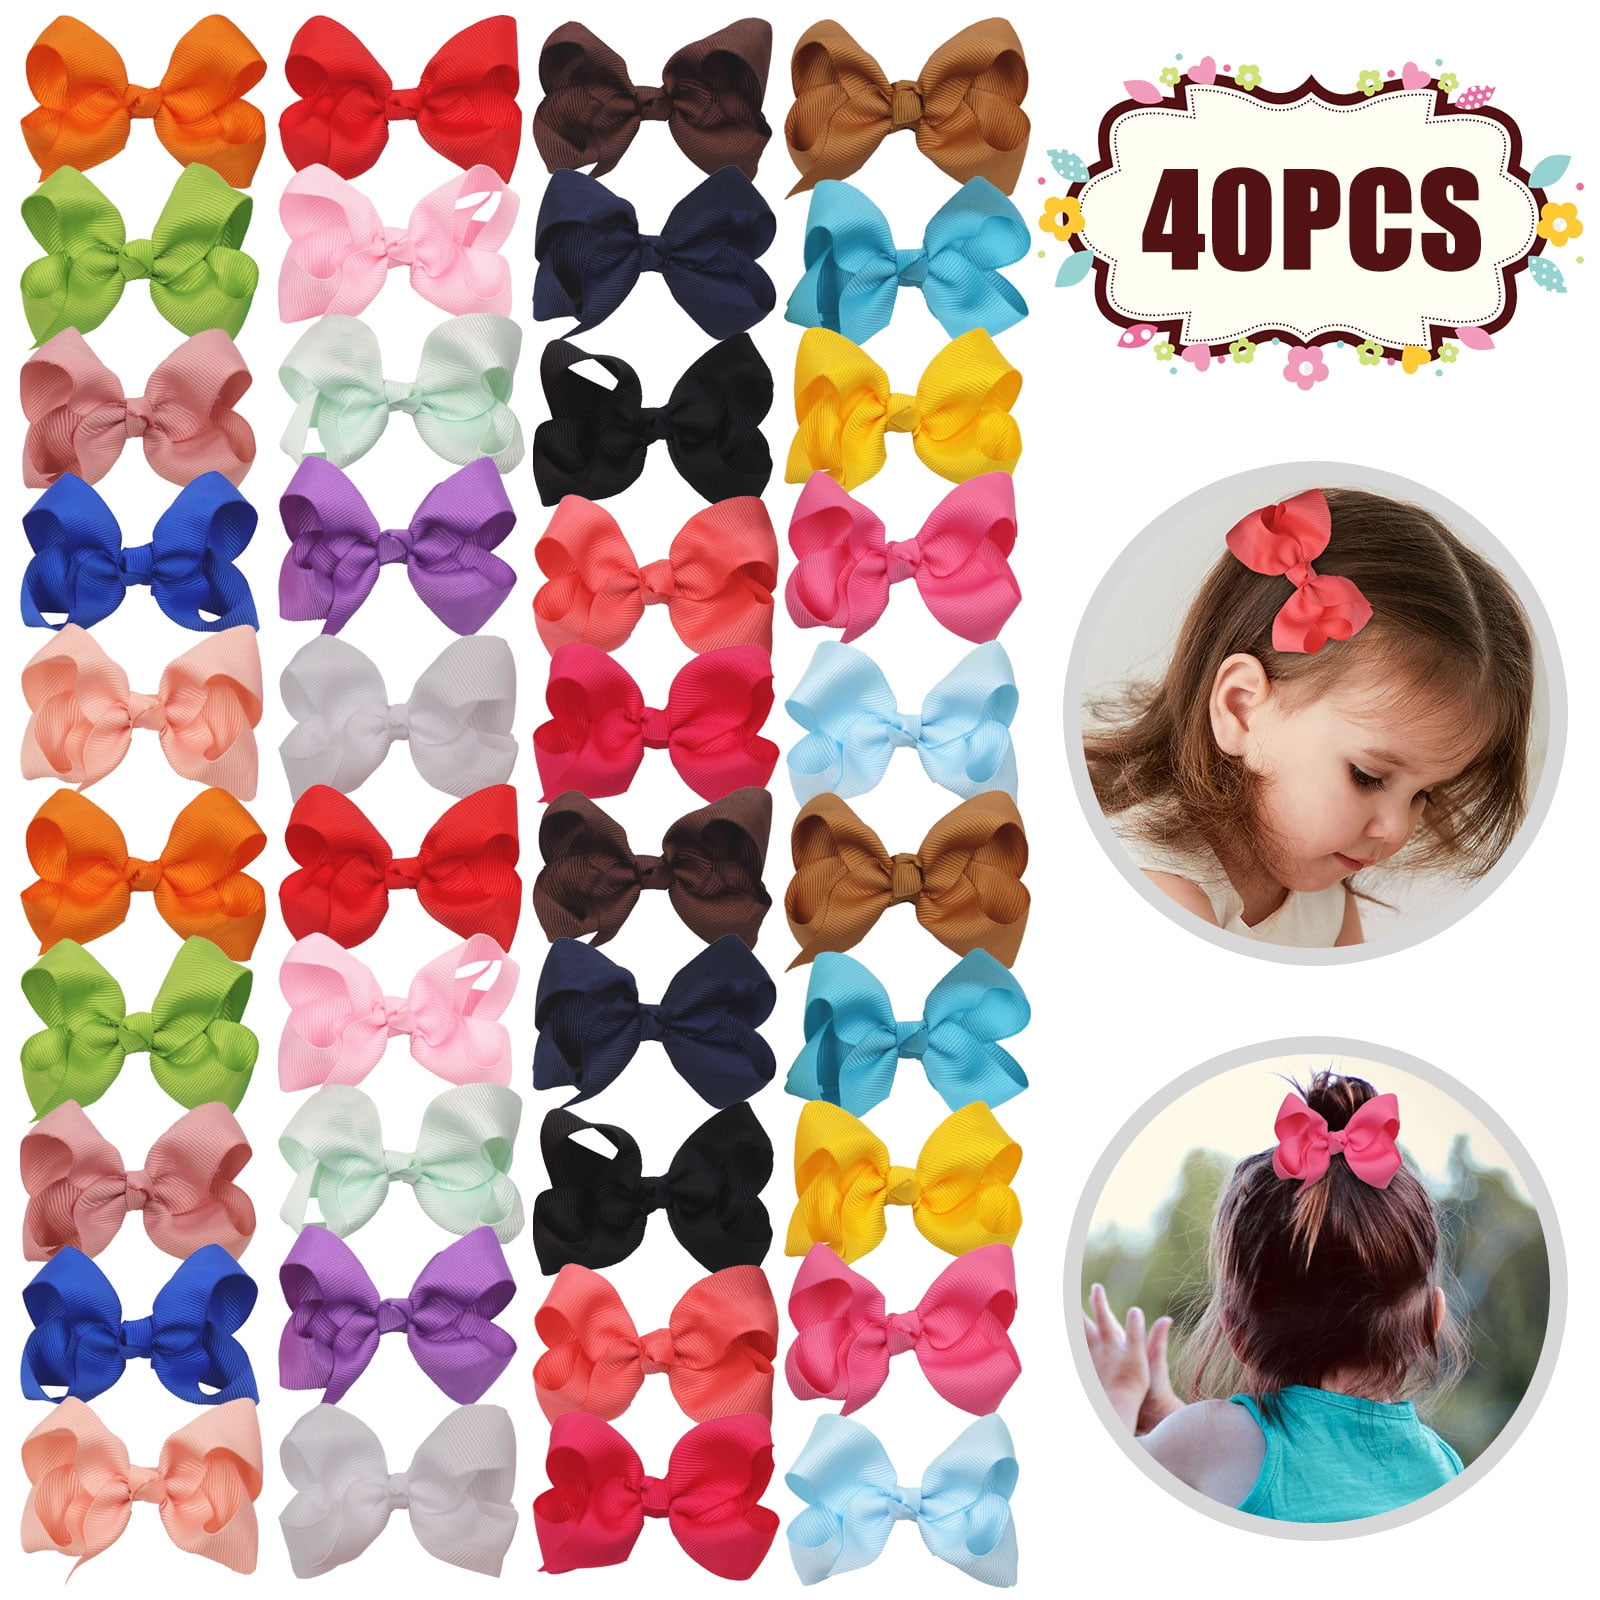 40pcs 2 Chiffon Flower Clips Ribbon Lined Clips Tiny Hair Clips for Baby Girls Infants Toddlers Kids 20 Colors in Pairs